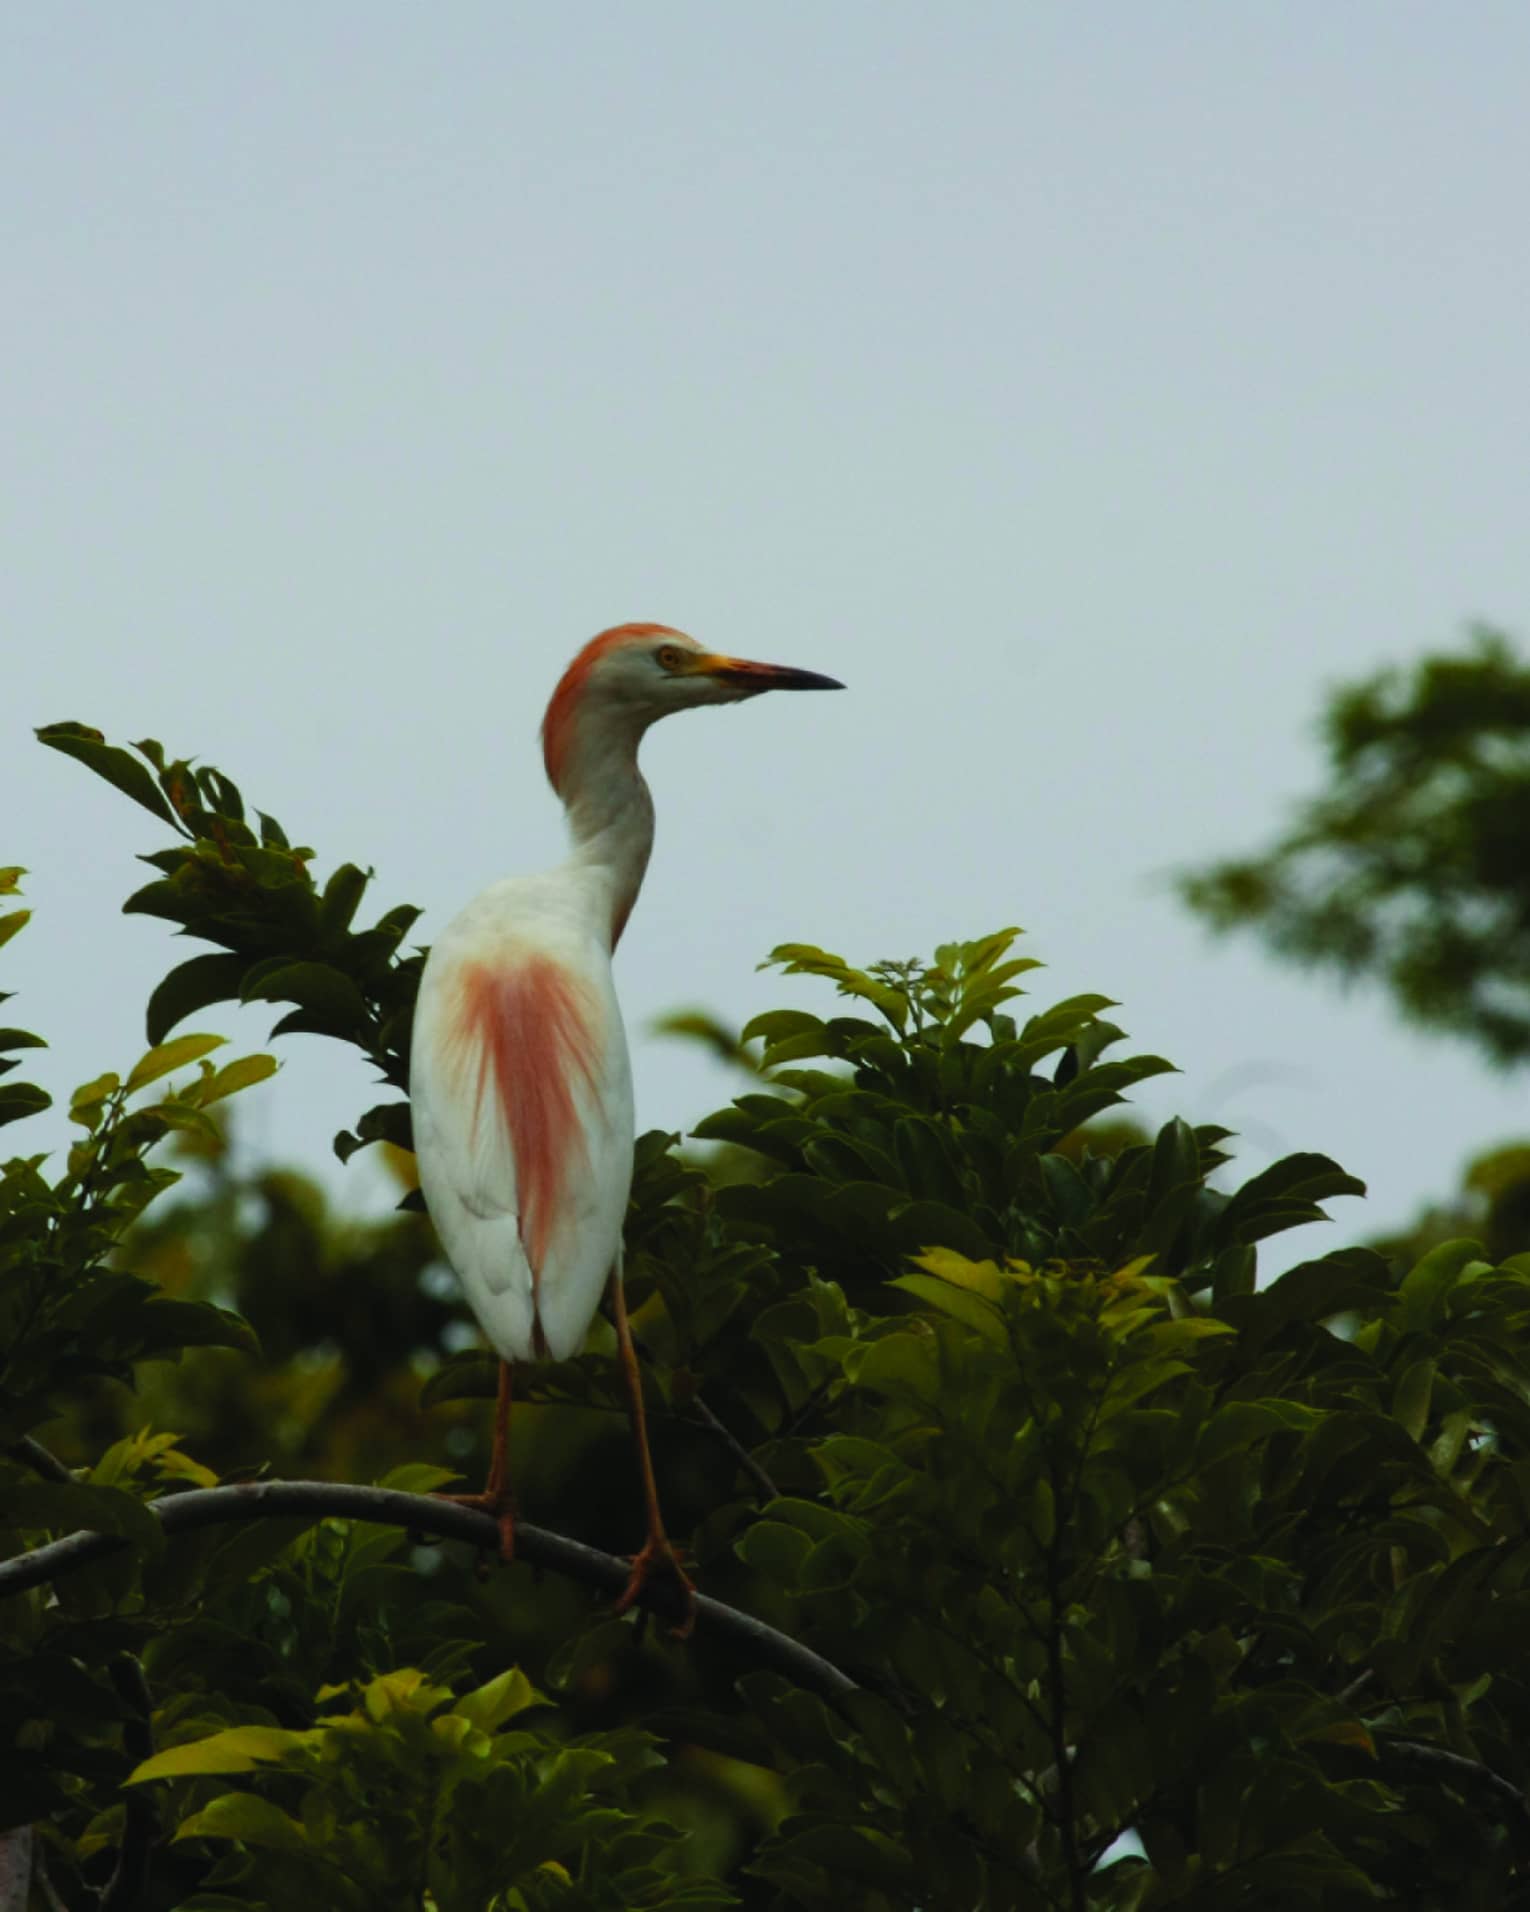 A white crane, splashes of crimson on its back, top of head and beak, perches on dark green foliage against blue background.